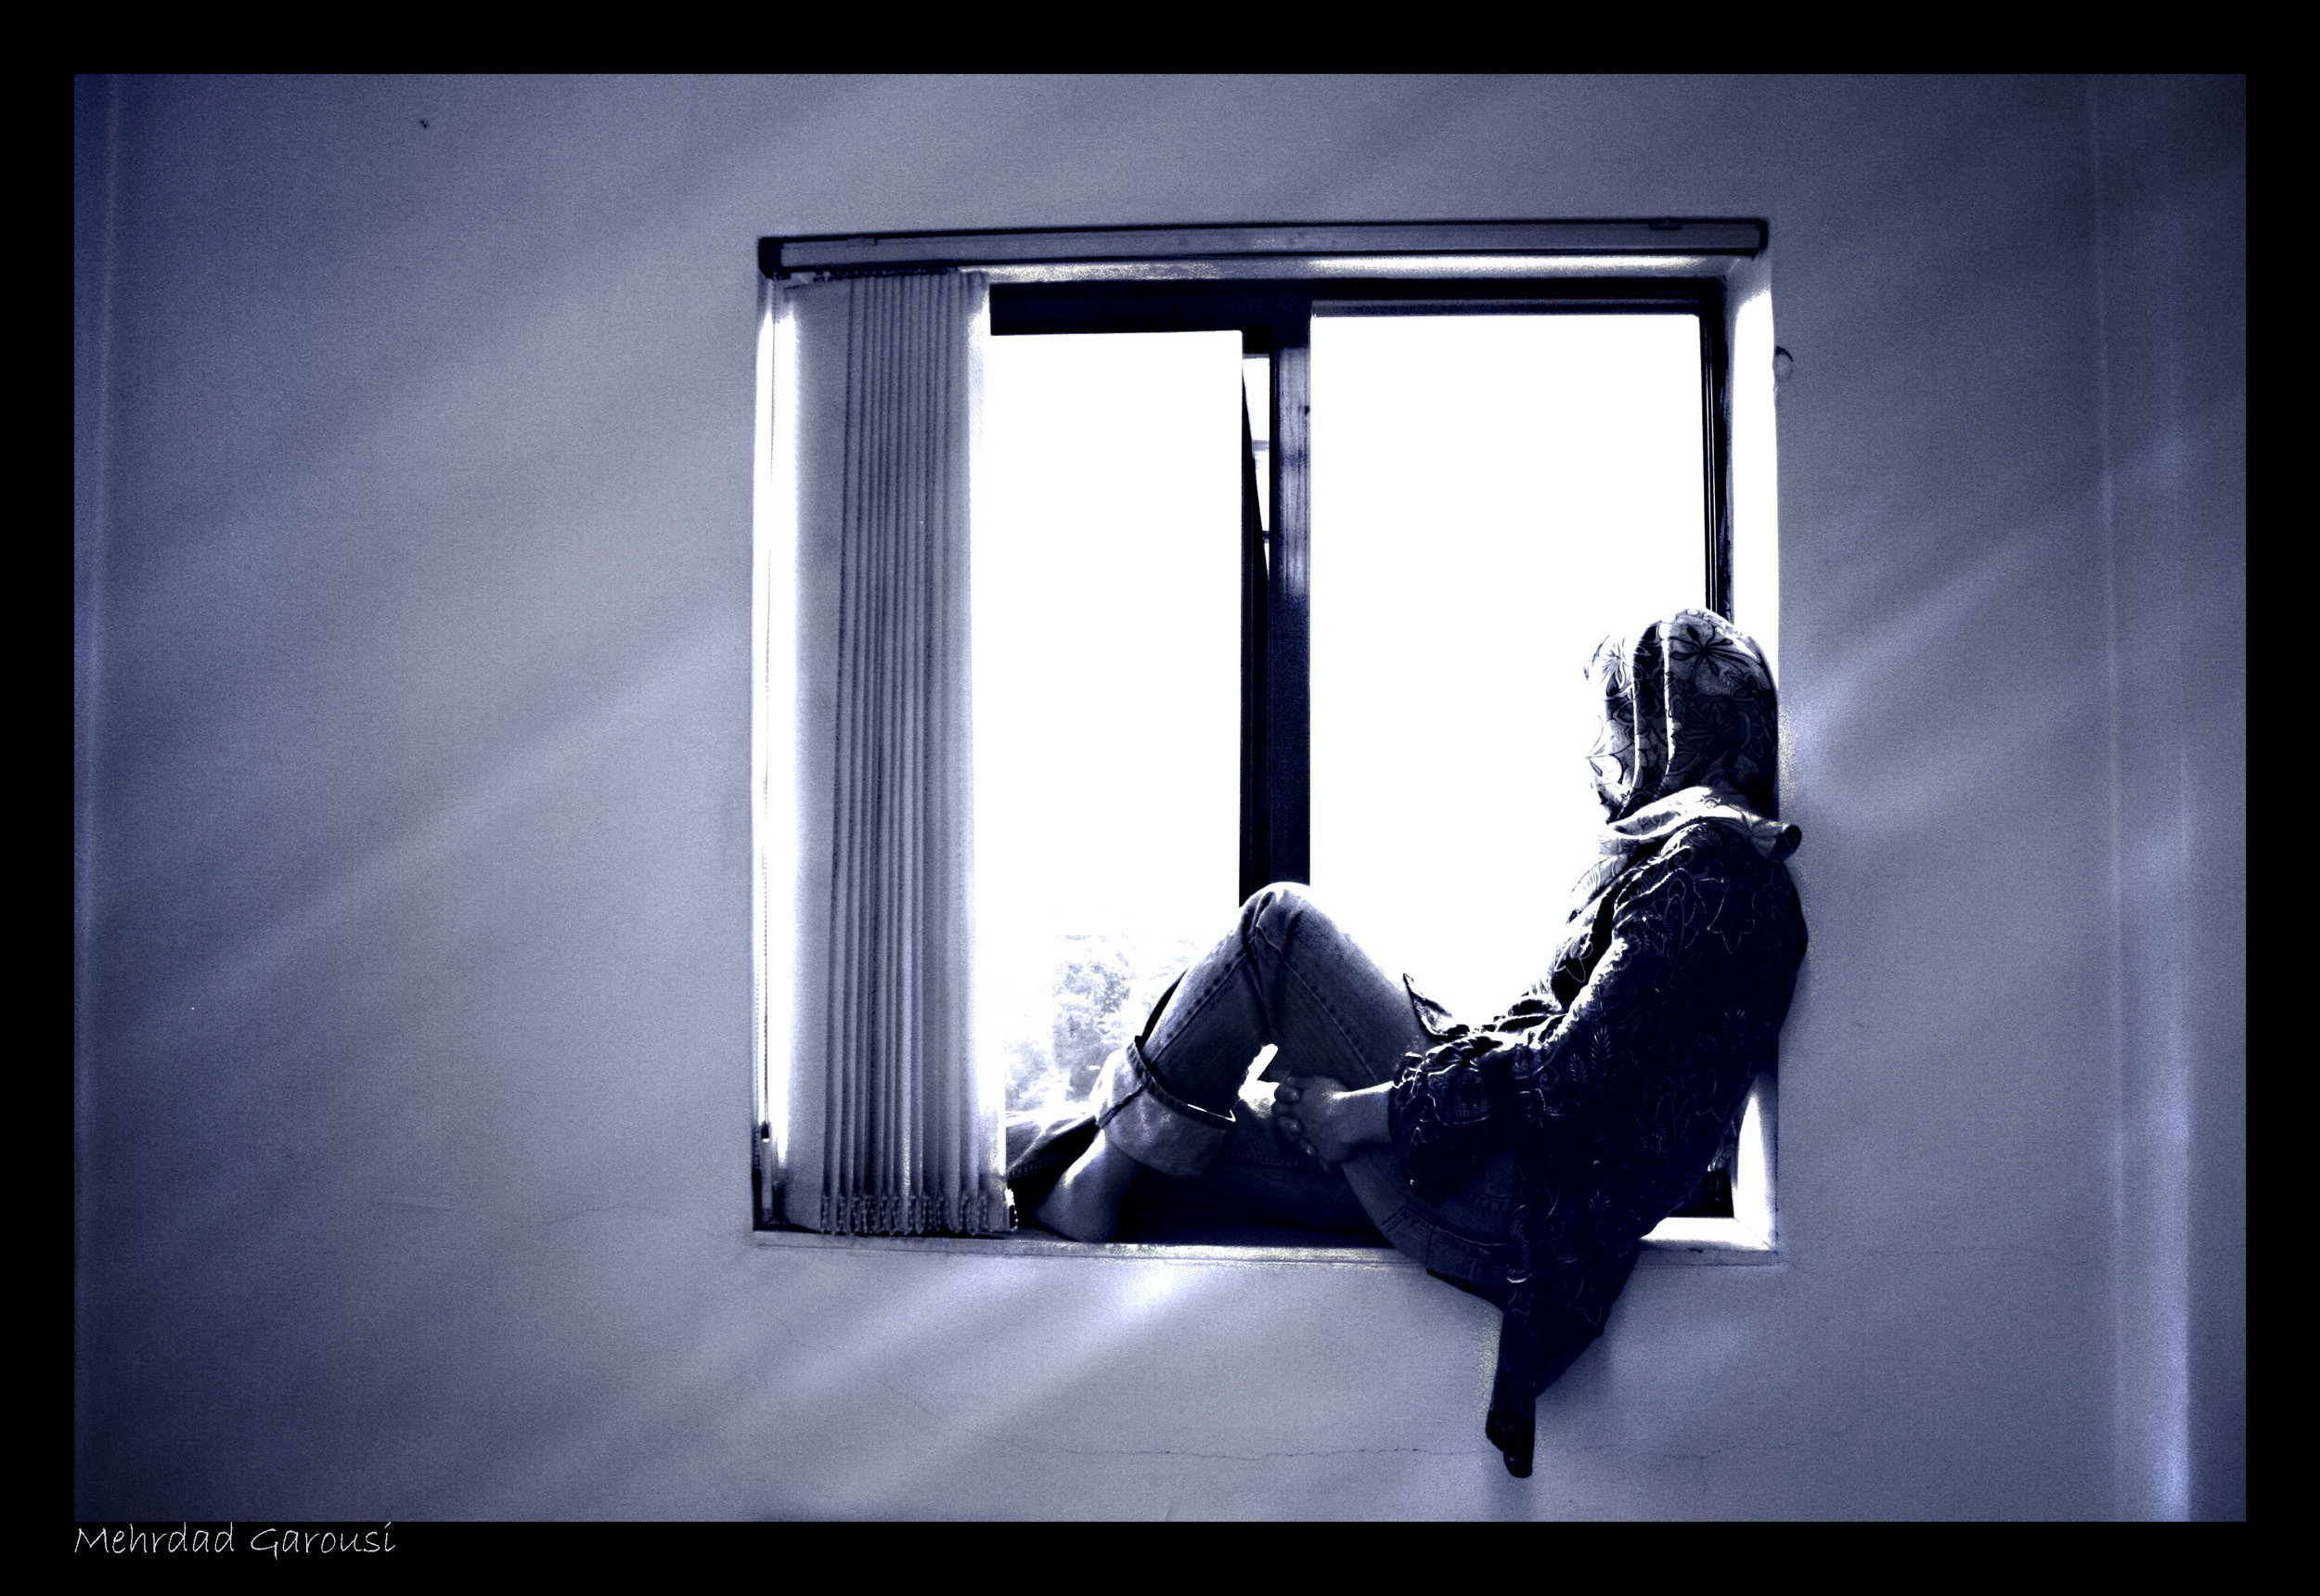 lonely, Mood, Sad, Alone, Sadness, Emotion, People, Loneliness, Solitude, Girl Wallpaper